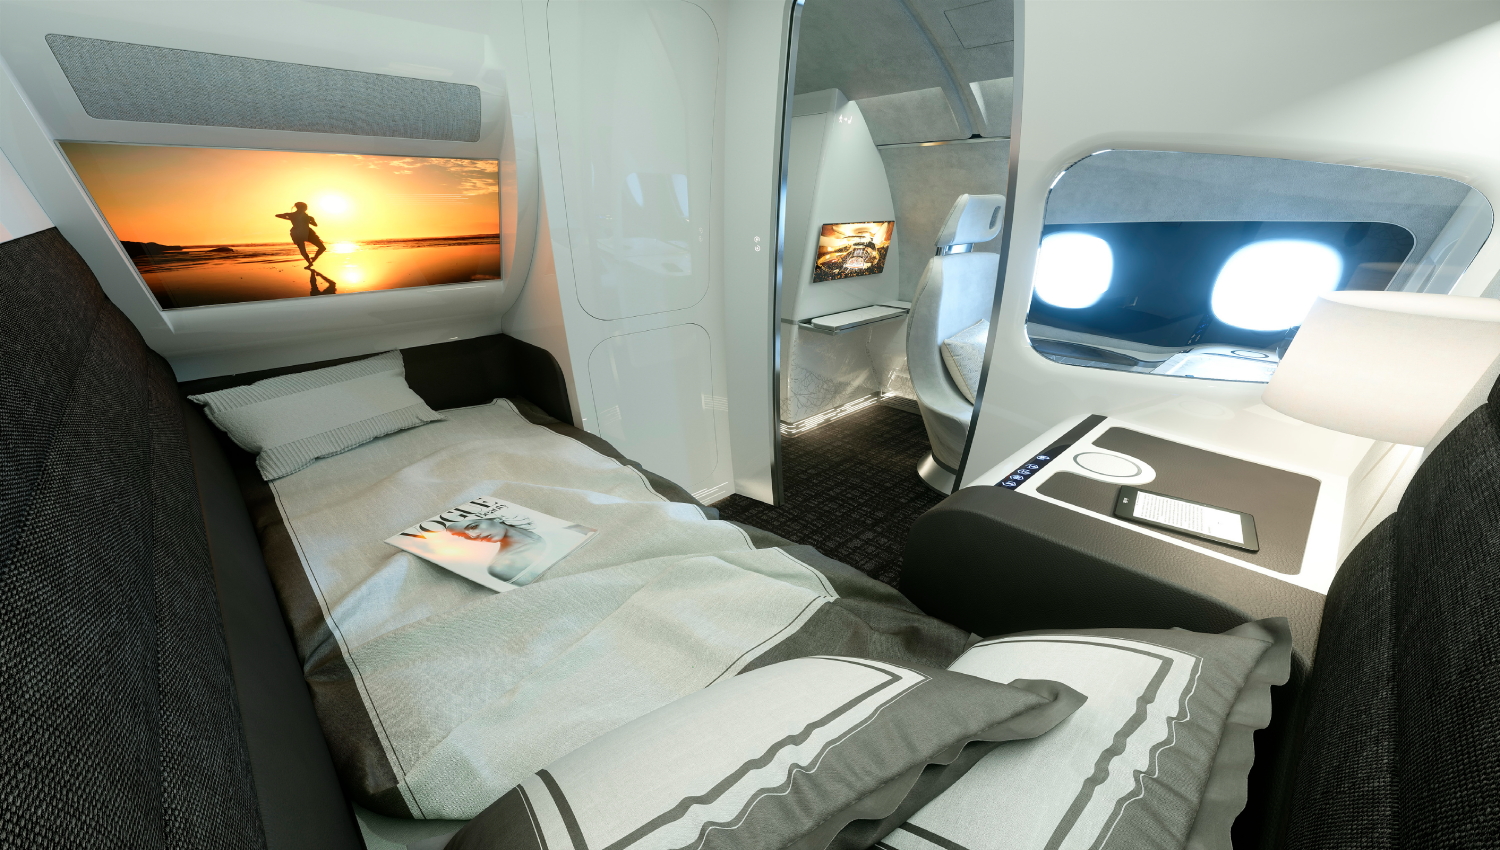 Attractive example of what Airbus Interiors Services can do to even just a small section of aircraft interior